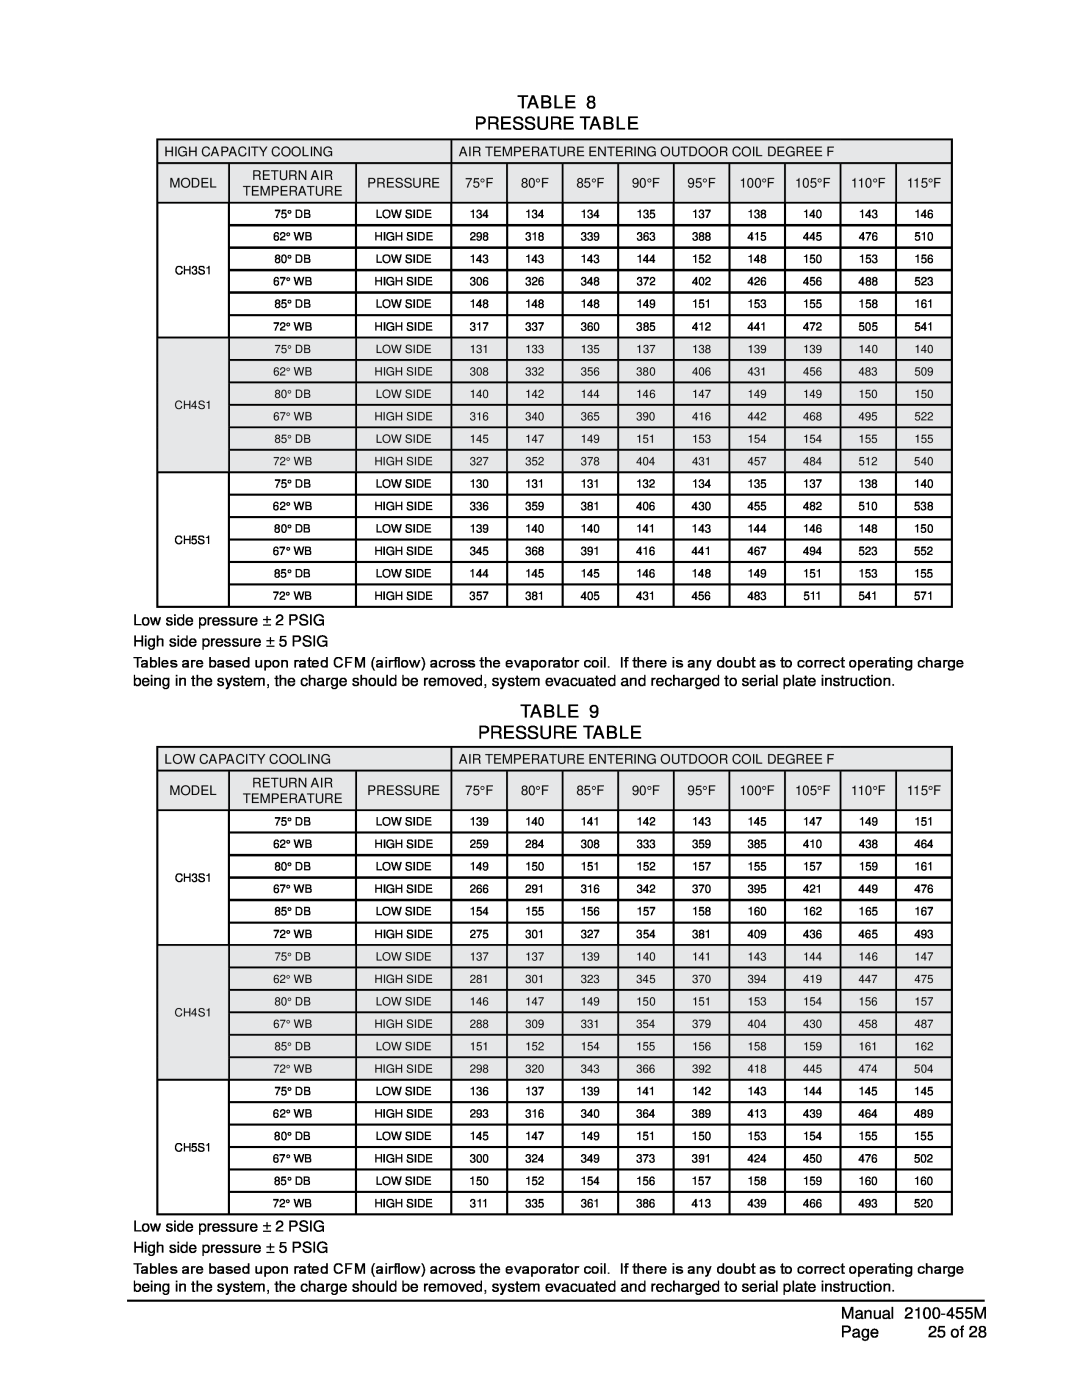 Bard CH5S1, CH4S1, CH3S1 installation instructions Table Pressure Table, Manual 2100-455M, Page, 25 of 